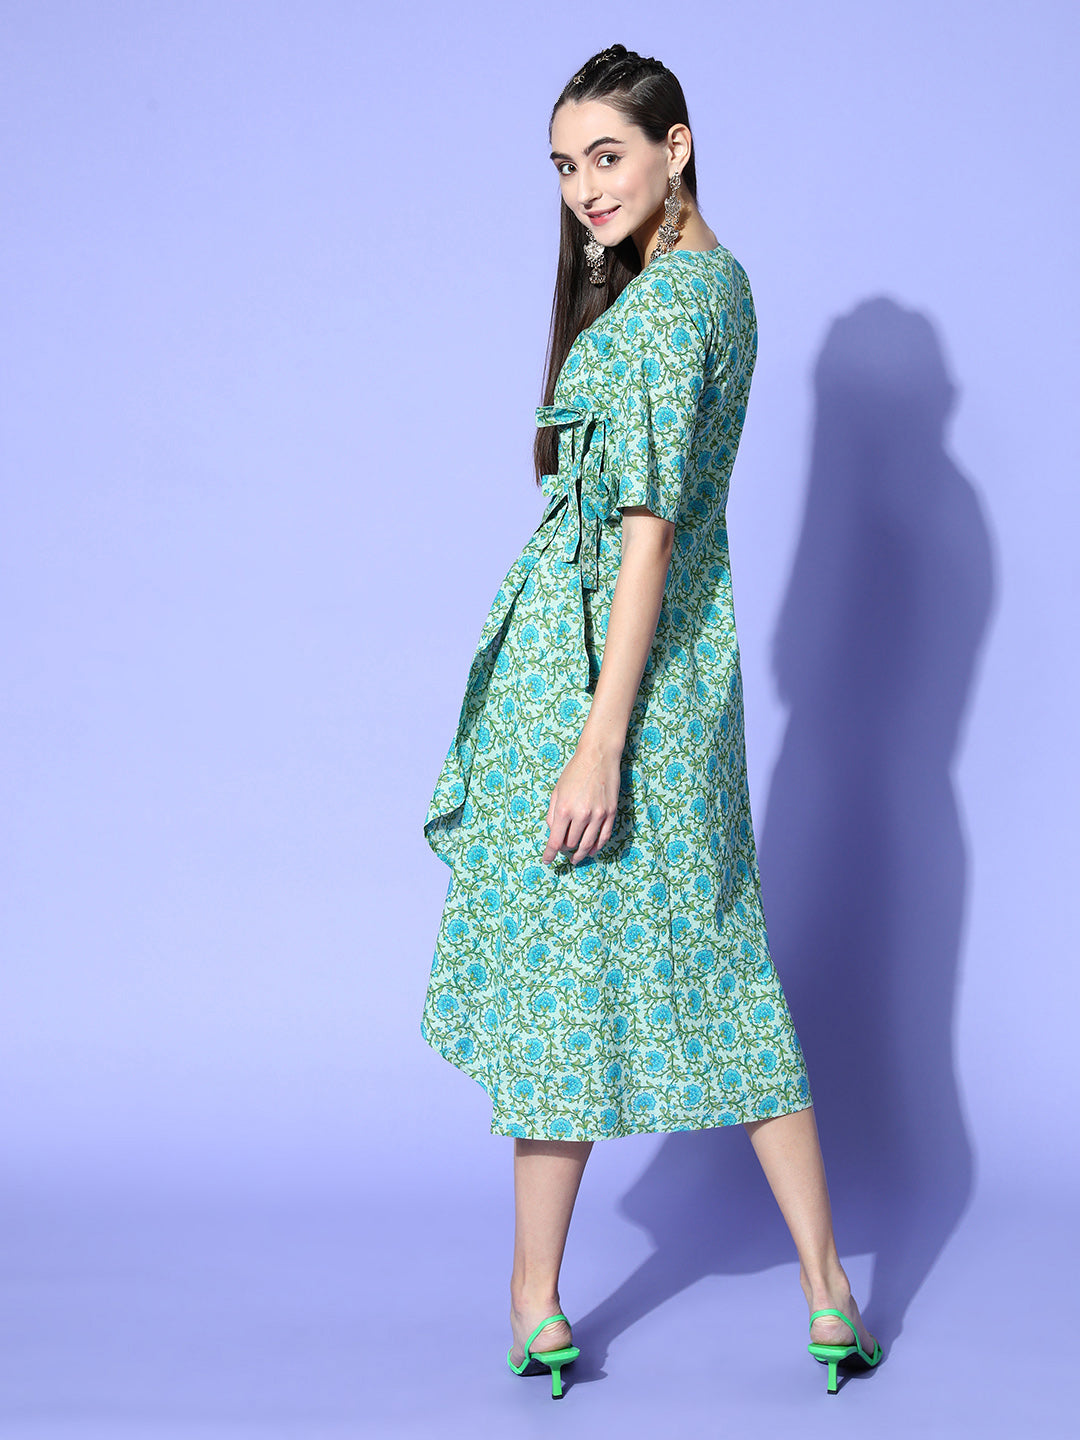 Green Floral Printed Cotton Embroidered Angrakha Style Dress, Has A Front Opening, Has a V neck, Short Regular Sleeves, Tie-Up At The Waist And A Frill On The Front, Has A Flared Hem